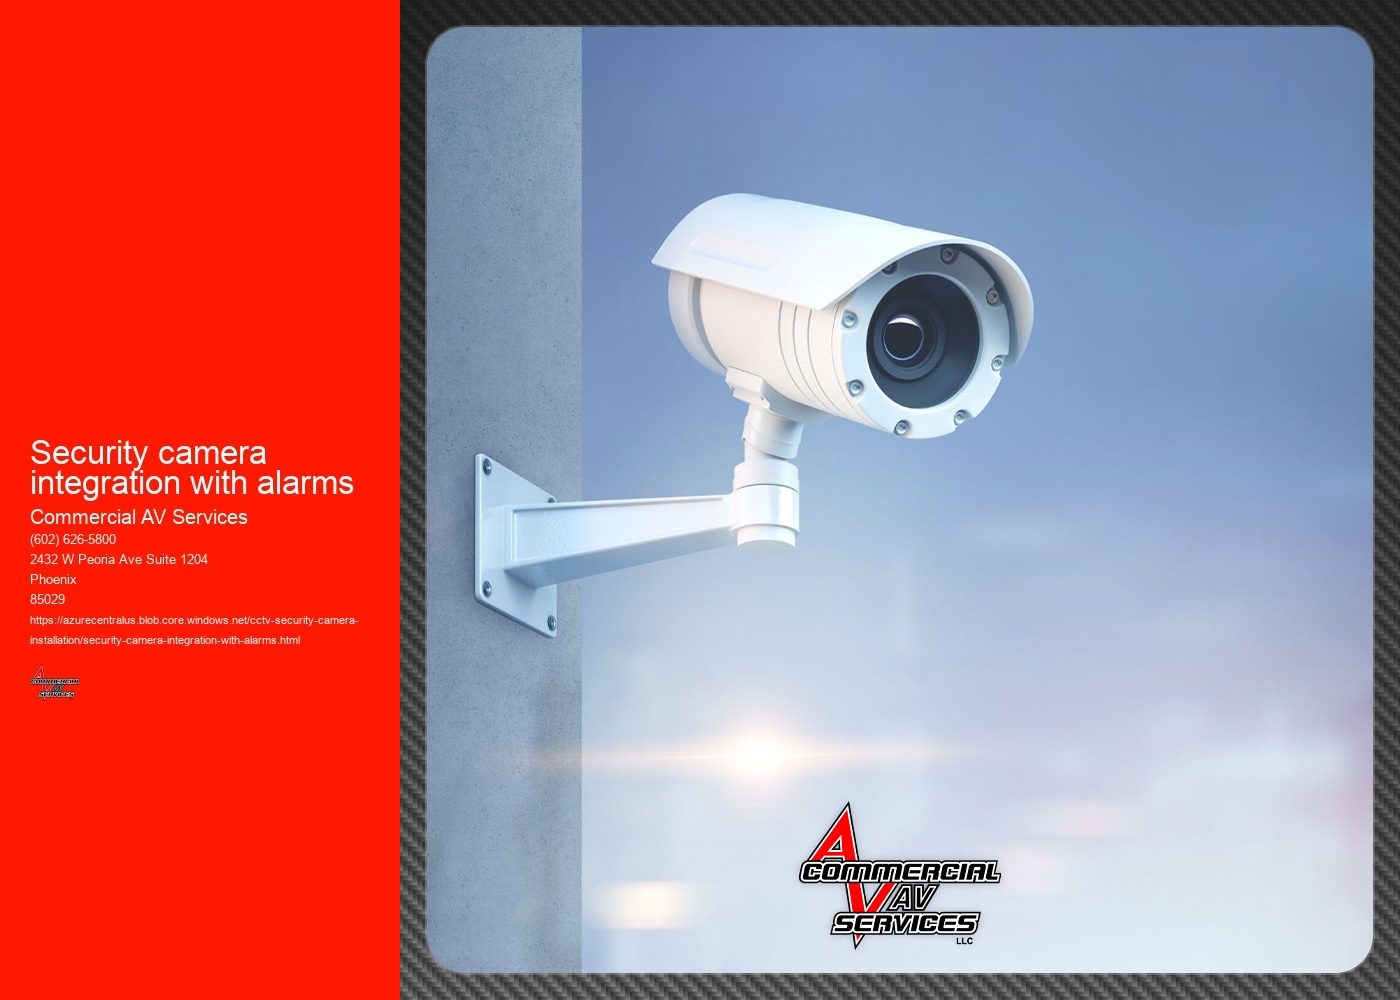 Are there specific security camera models that are designed to seamlessly integrate with alarm systems?